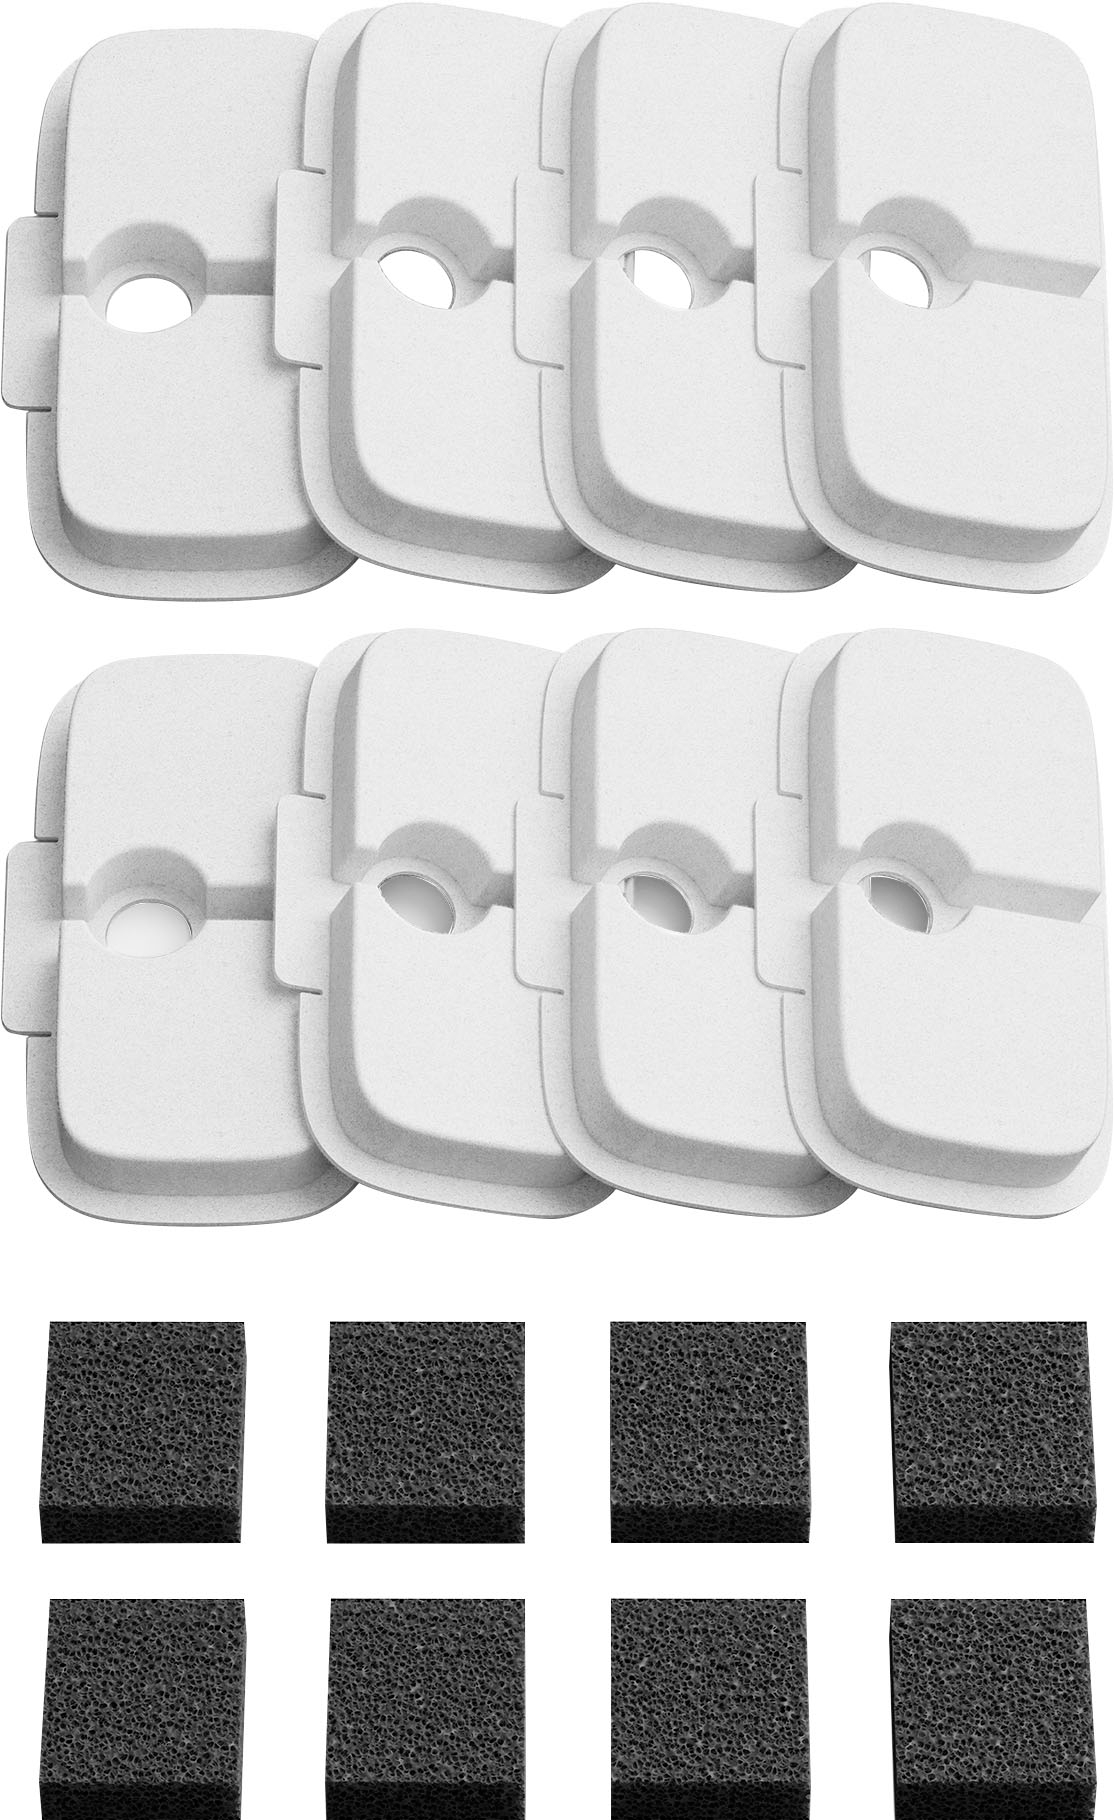 Angle View: PetLibro - Dockstream Pet Water Fountain Replacement Filter (8 pack) - White